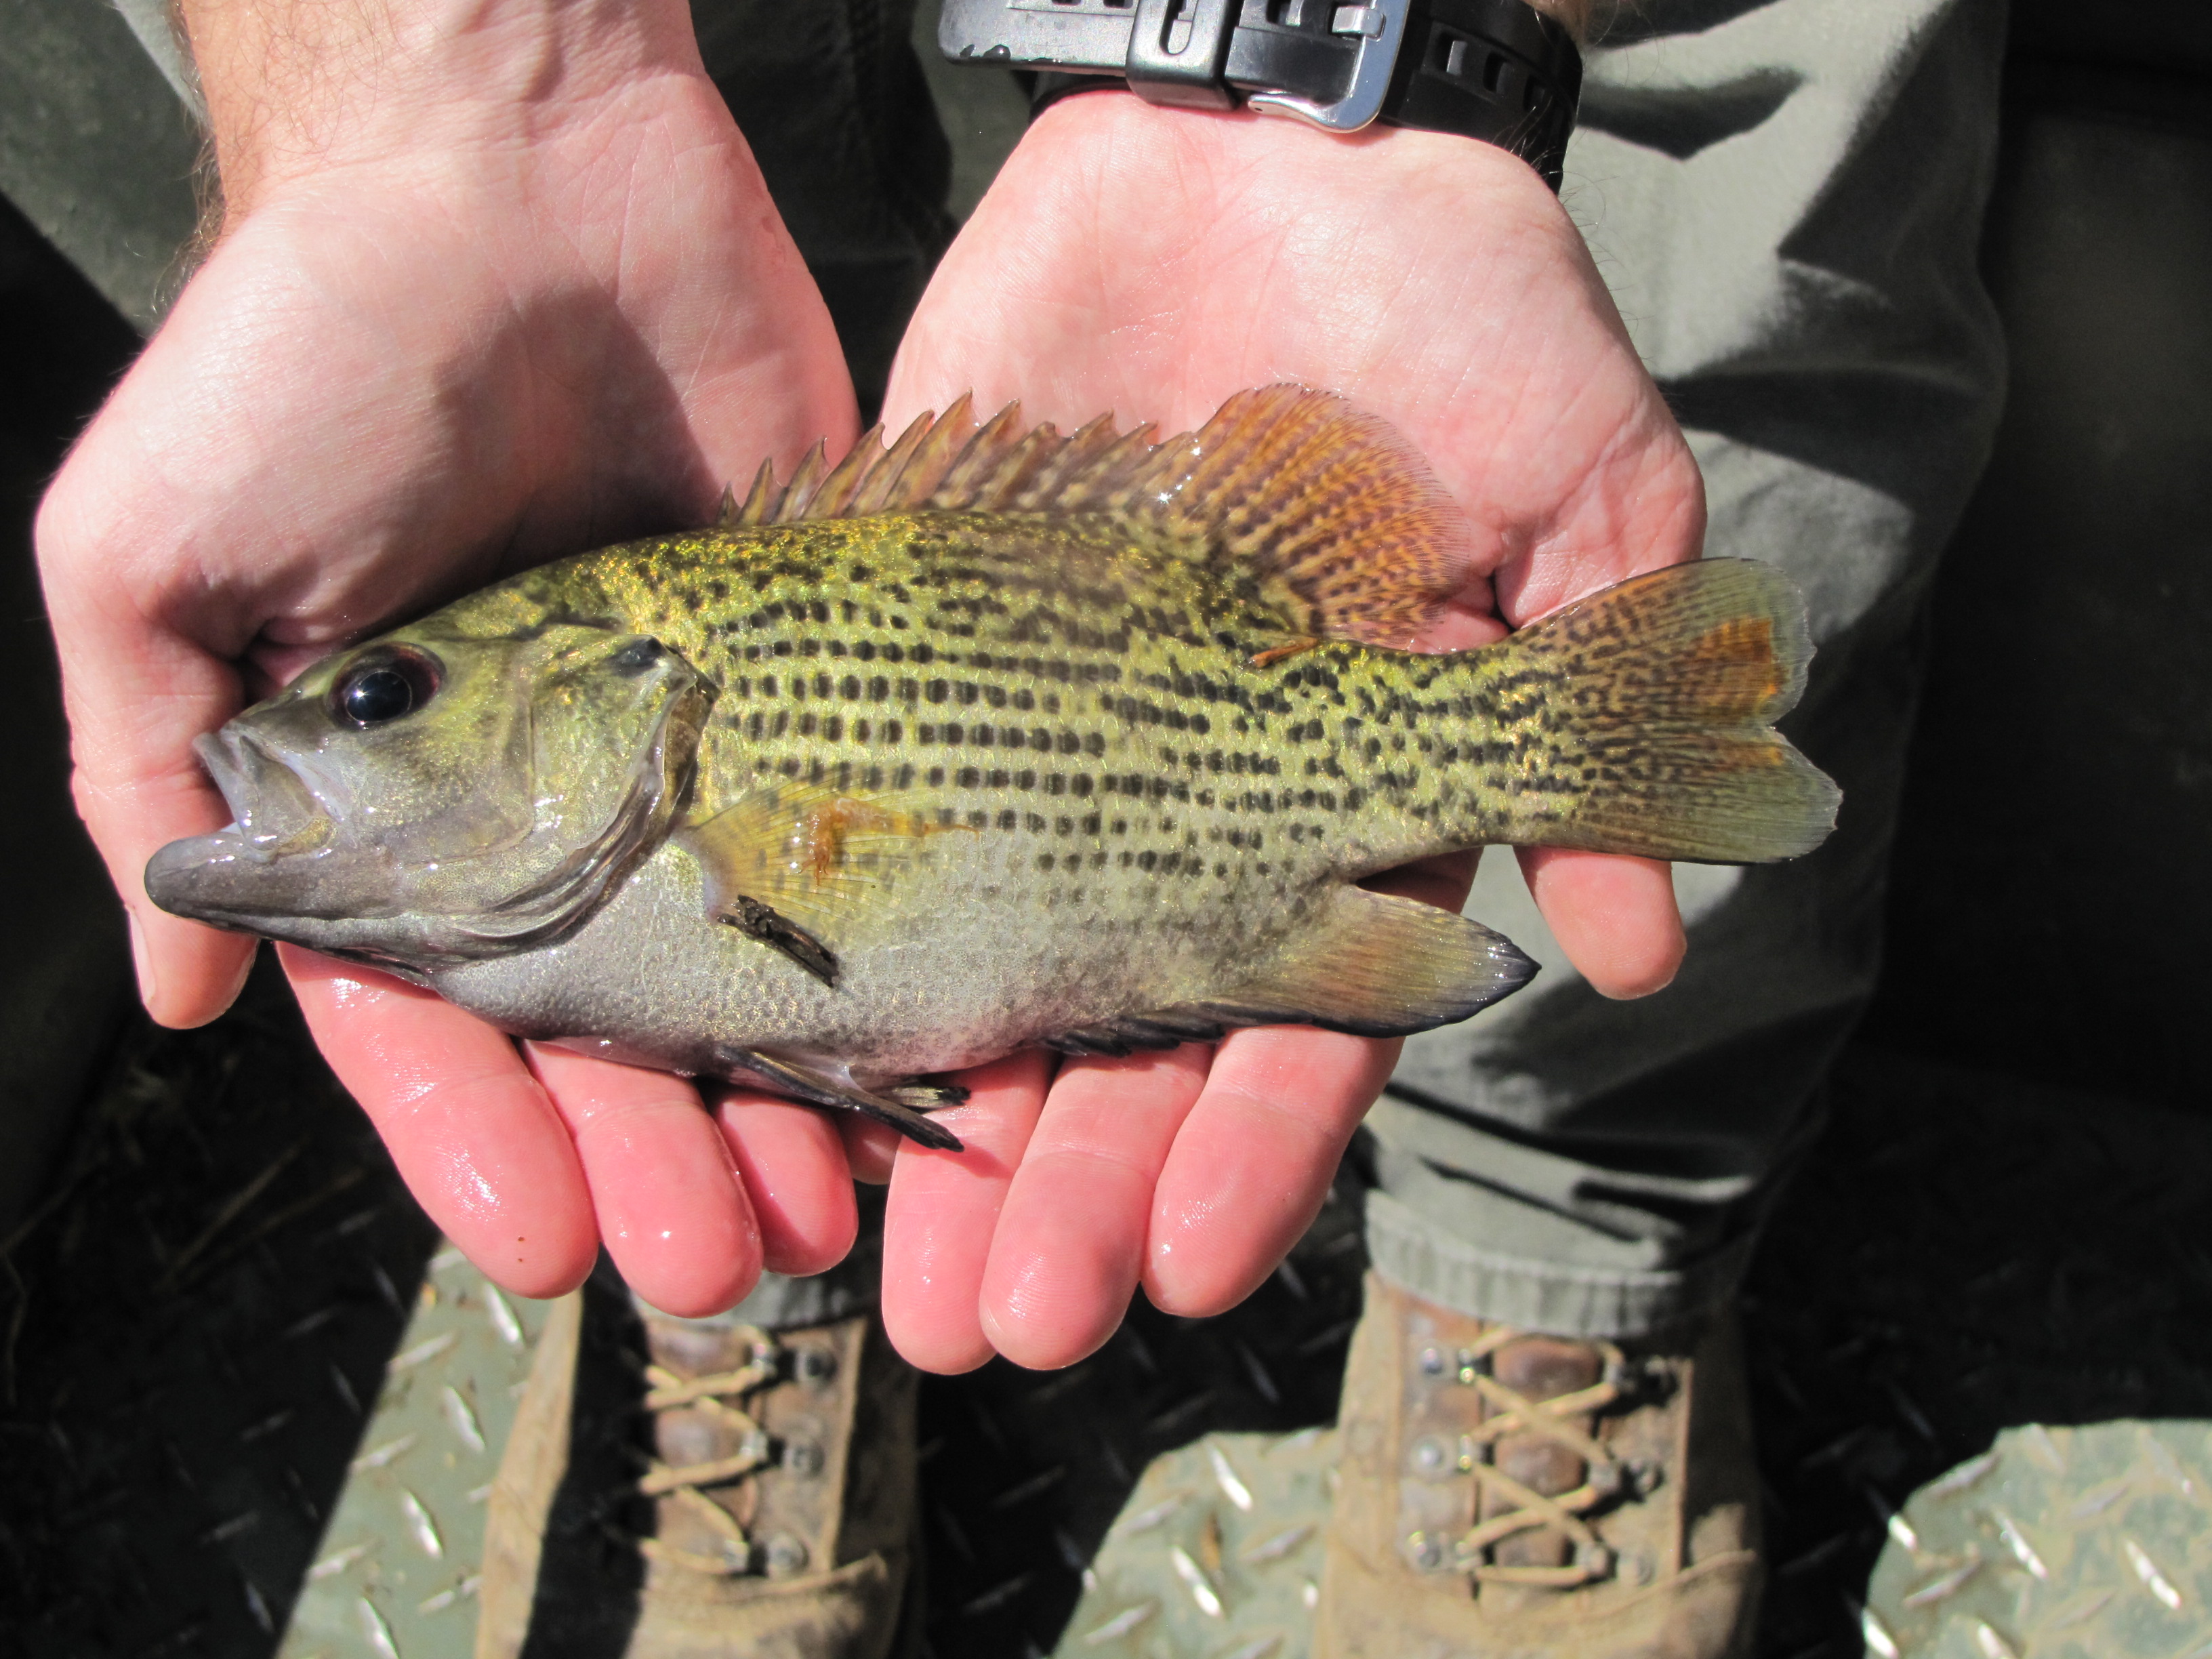 Rock bass are present throughout the South Fork Licking River with fish present up to 9.5 inches.